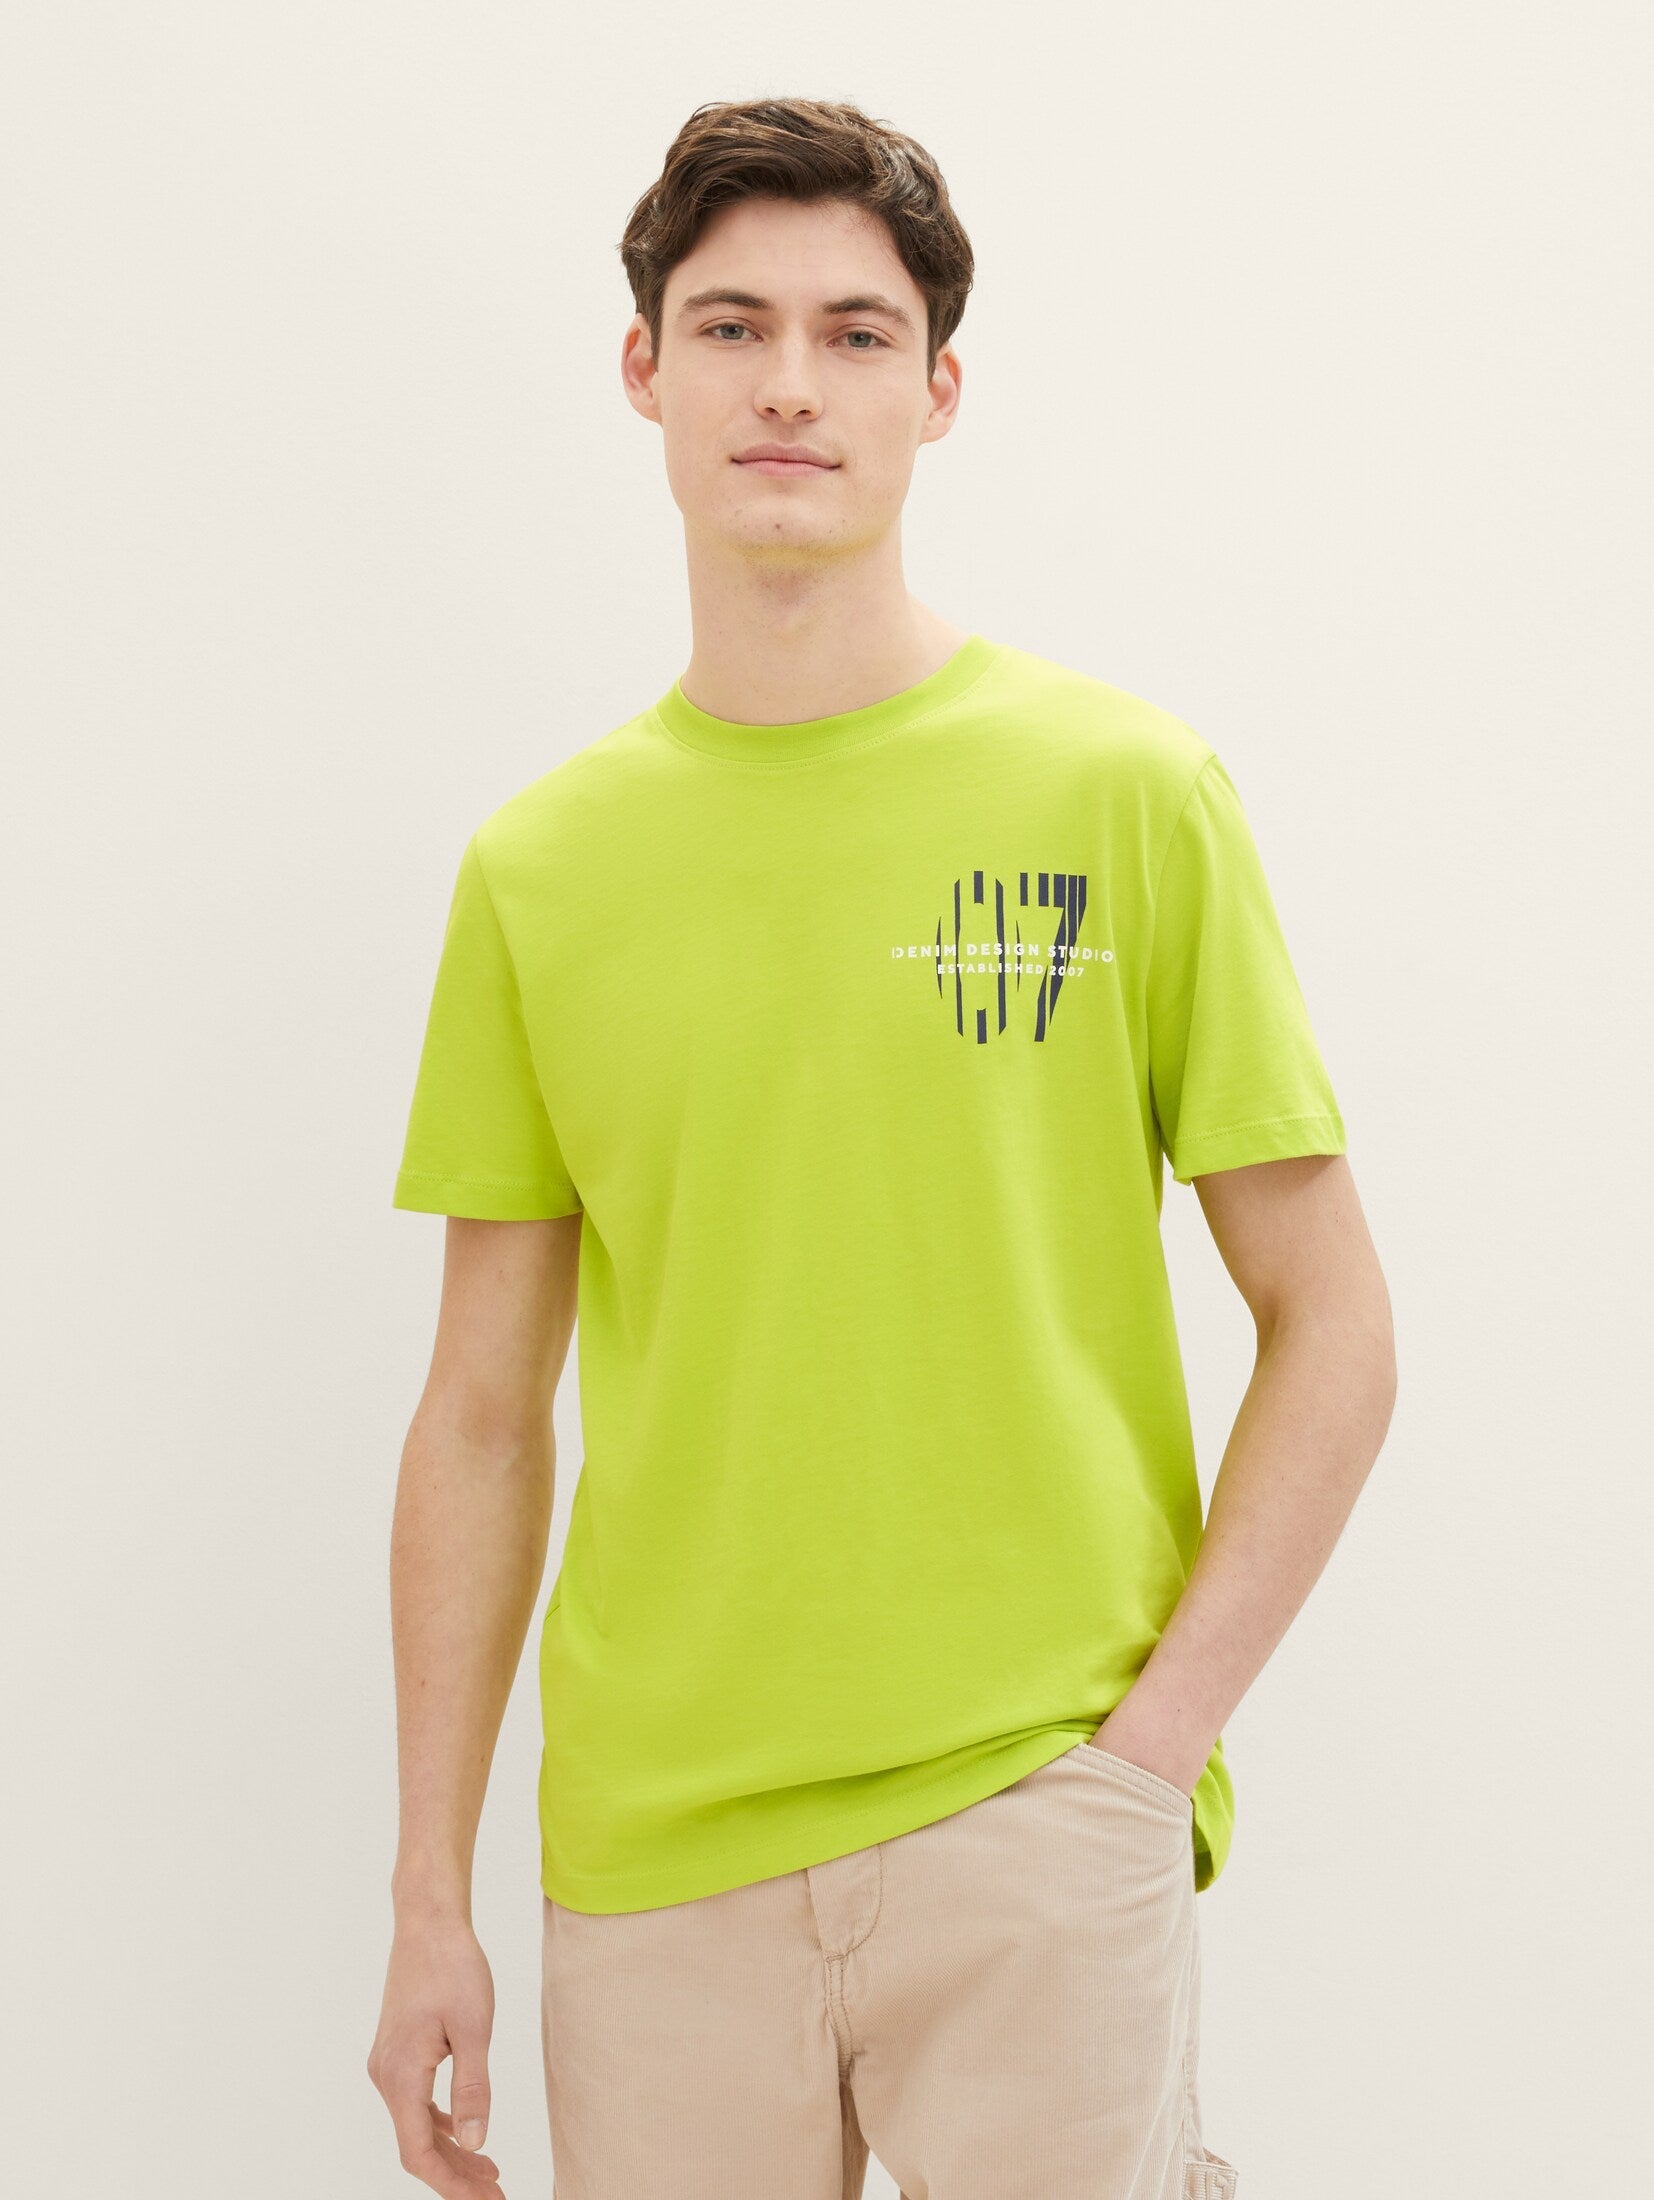 Tom Tailor Juicy Kiwi T-shirt With Front Design